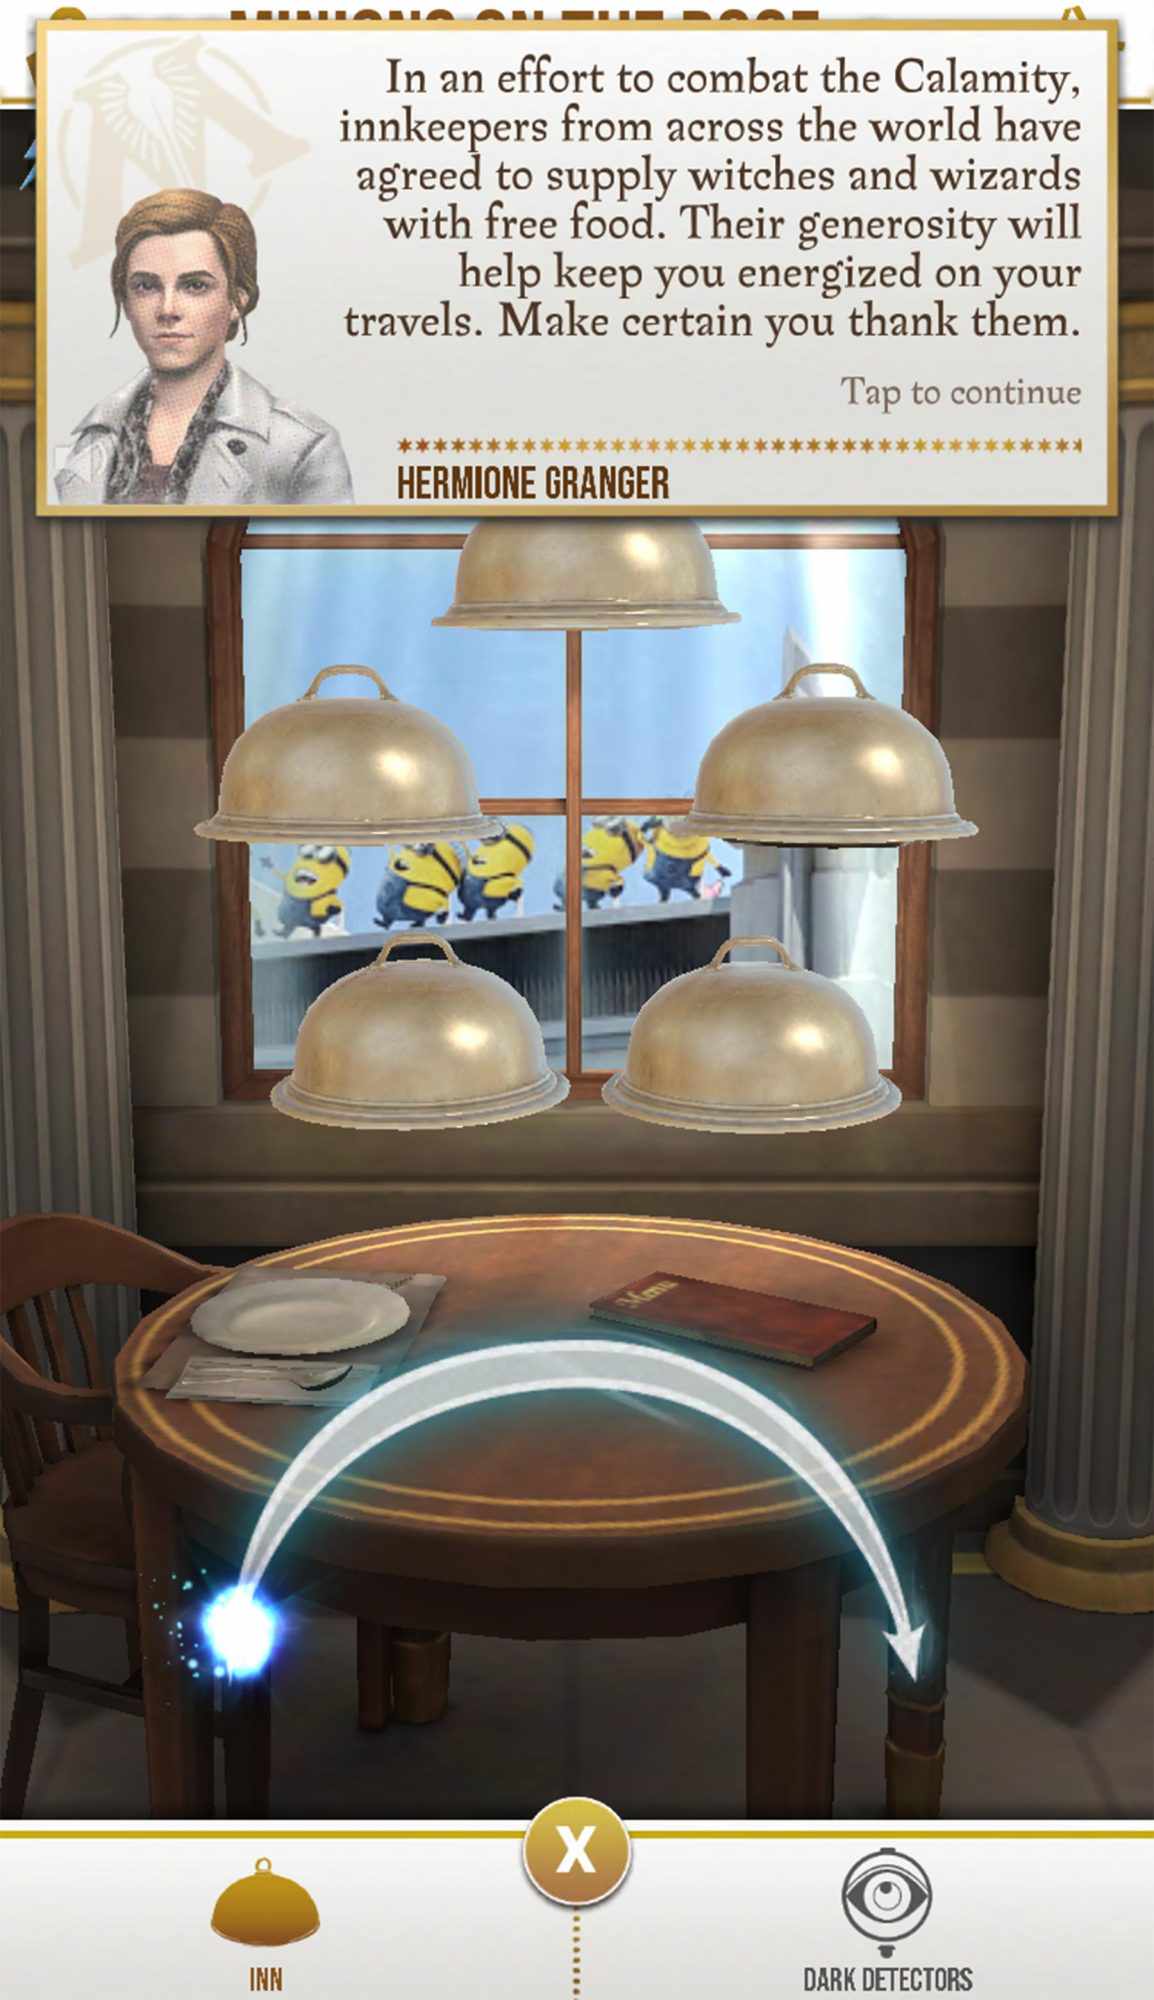 Harry Potter: Wizards Unite Mobile game CR: Niantic